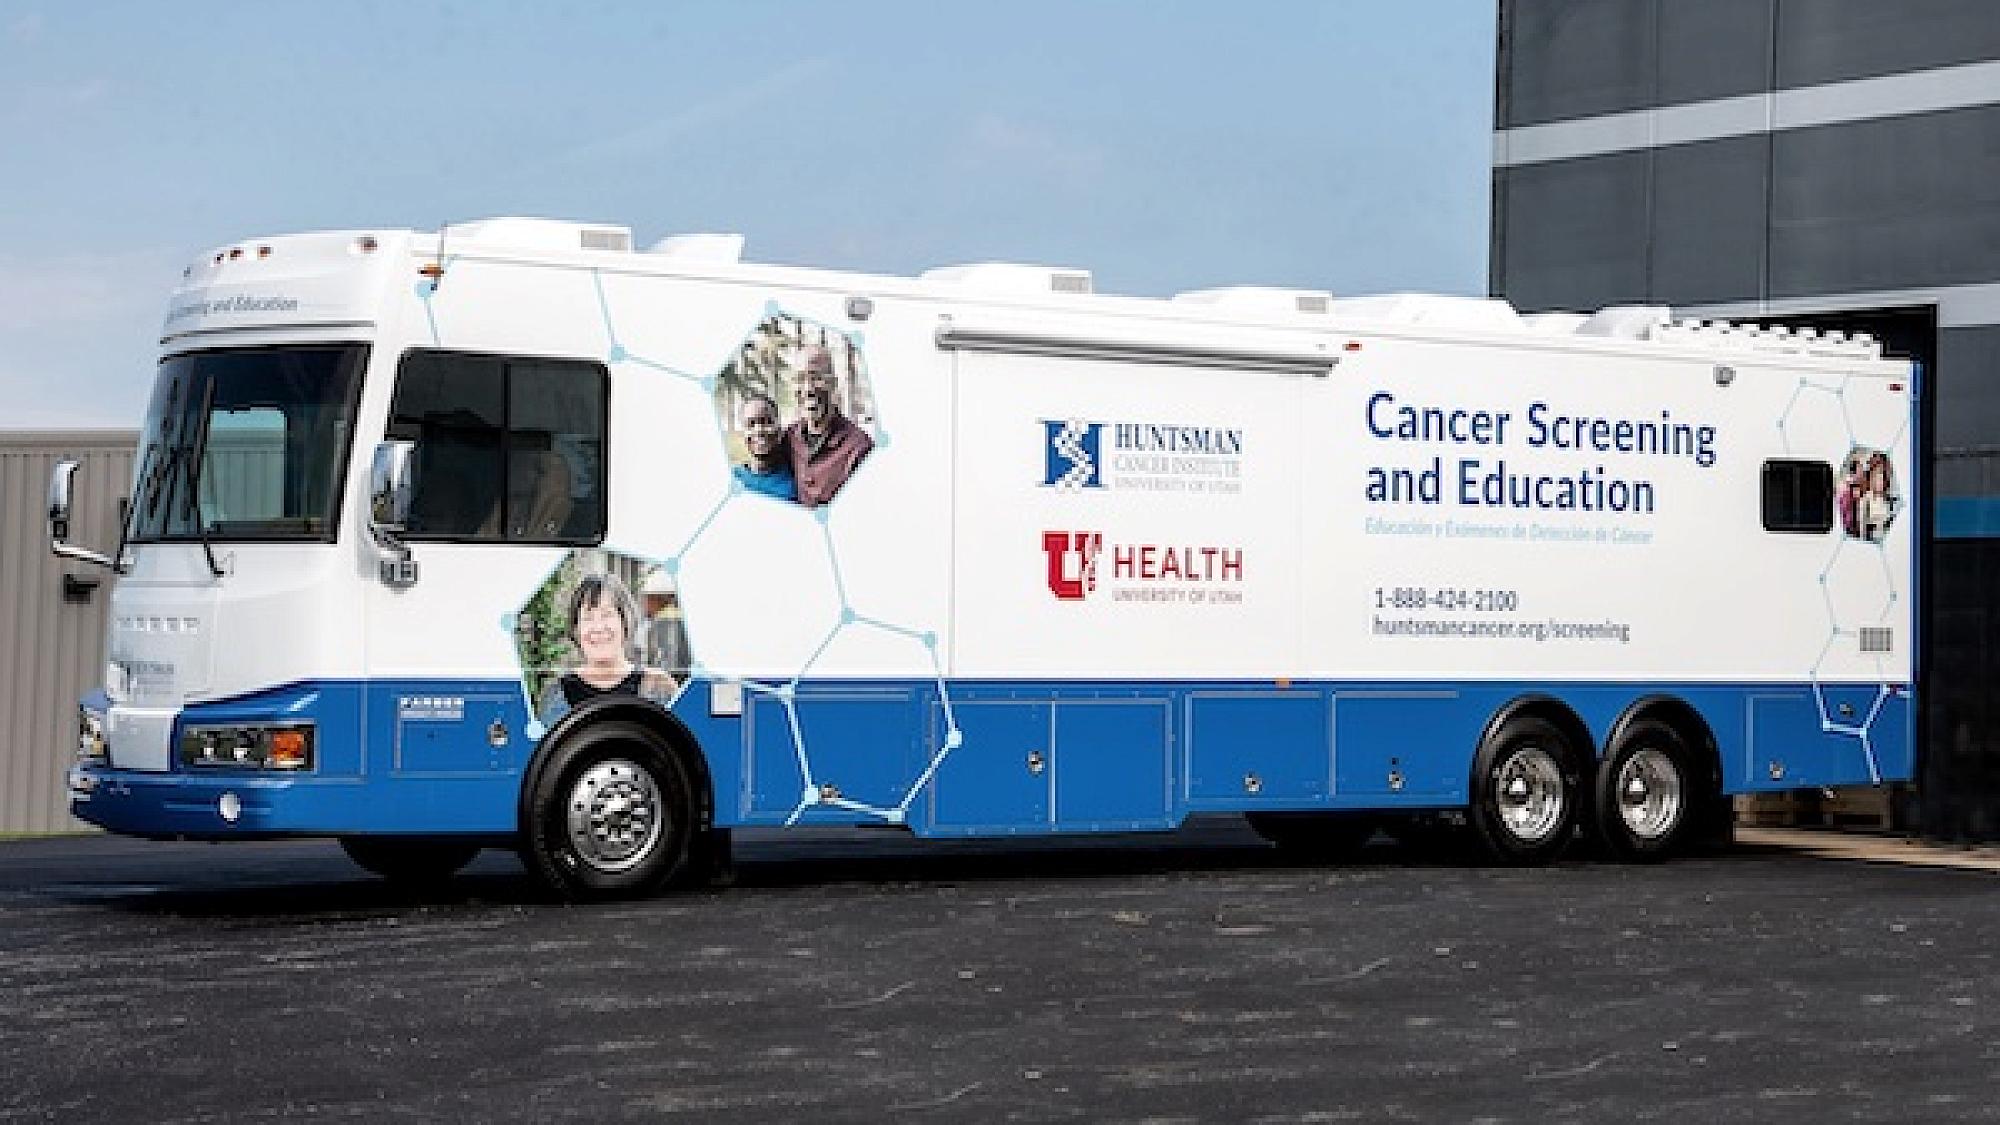 Cancer Screening and Education bus